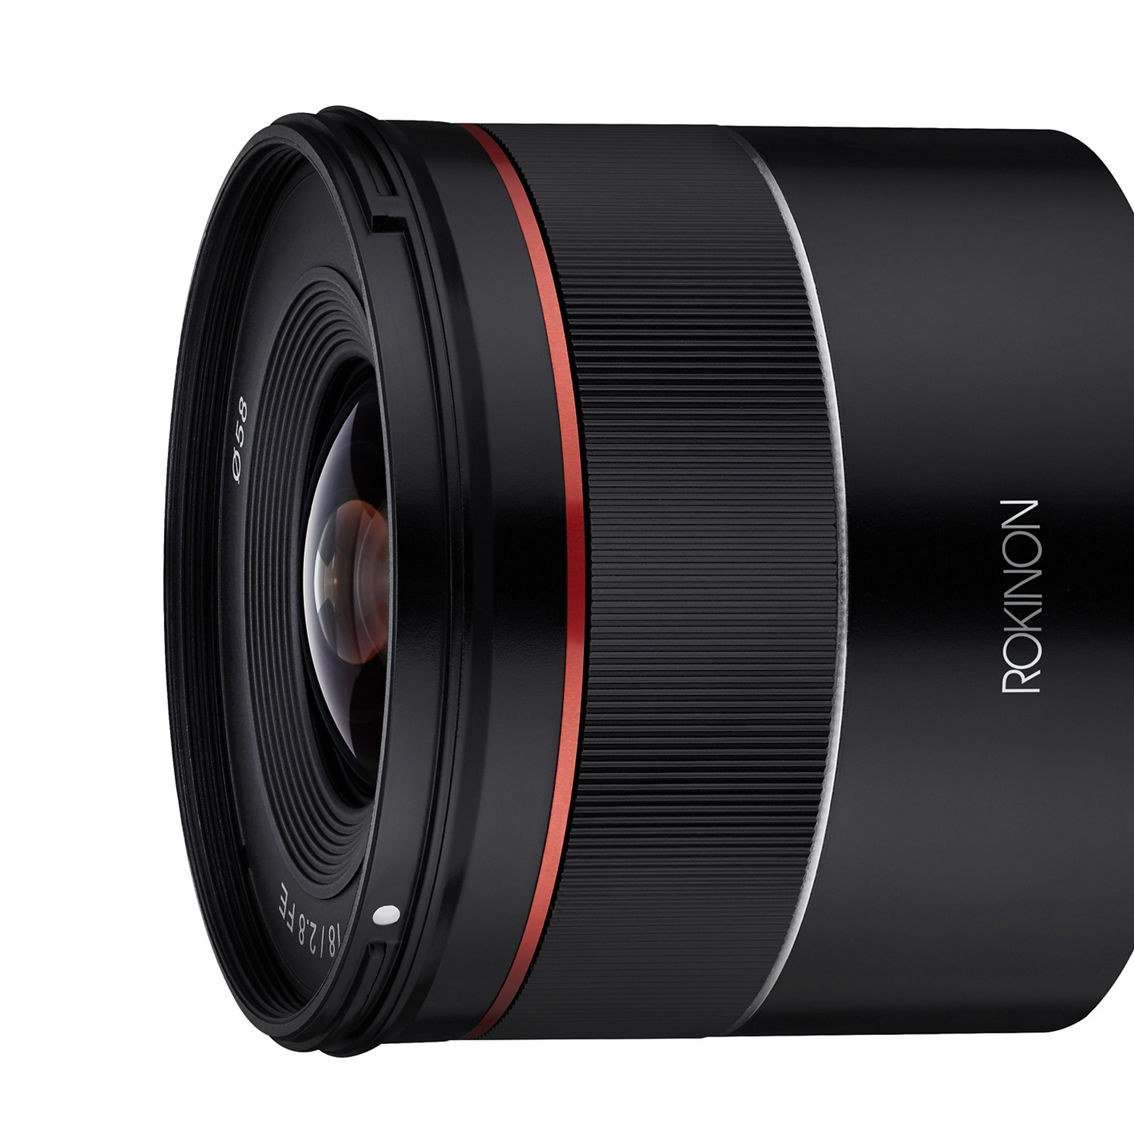 Rokinon 18mm F2.8 AF Wide Angle Full Frame Lens for Sony E Mount - Image 5 of 5